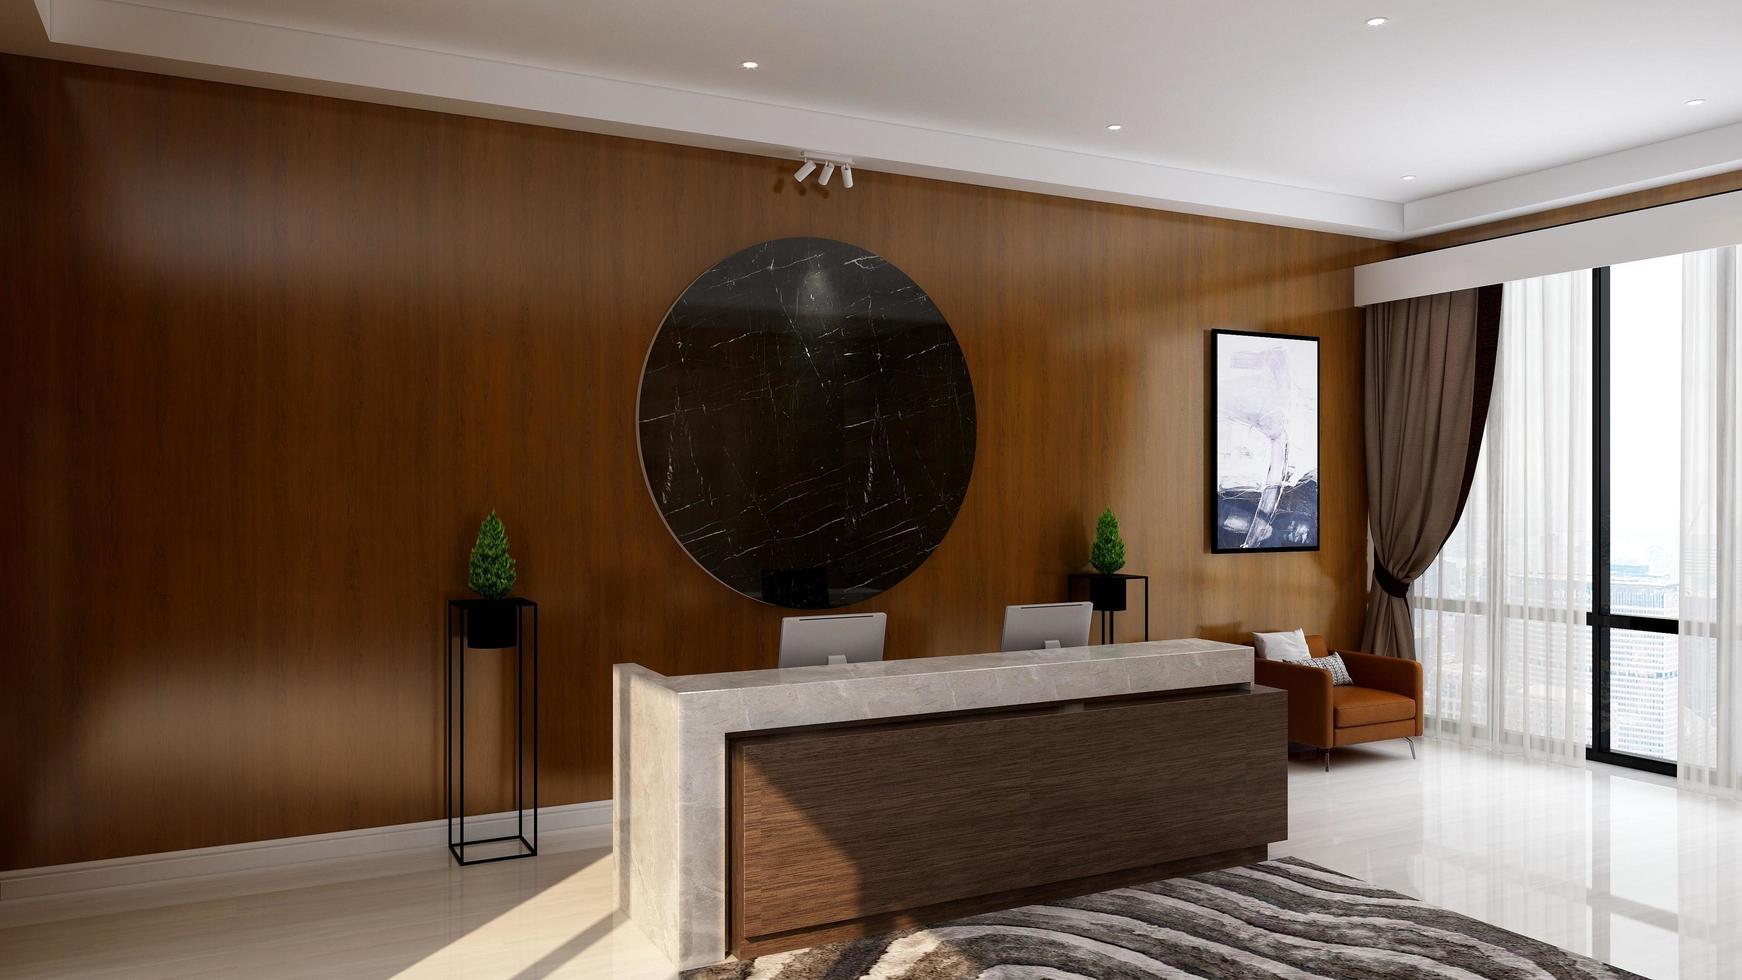 3d rendering office front desk or receptionist room with wooden design interior photo